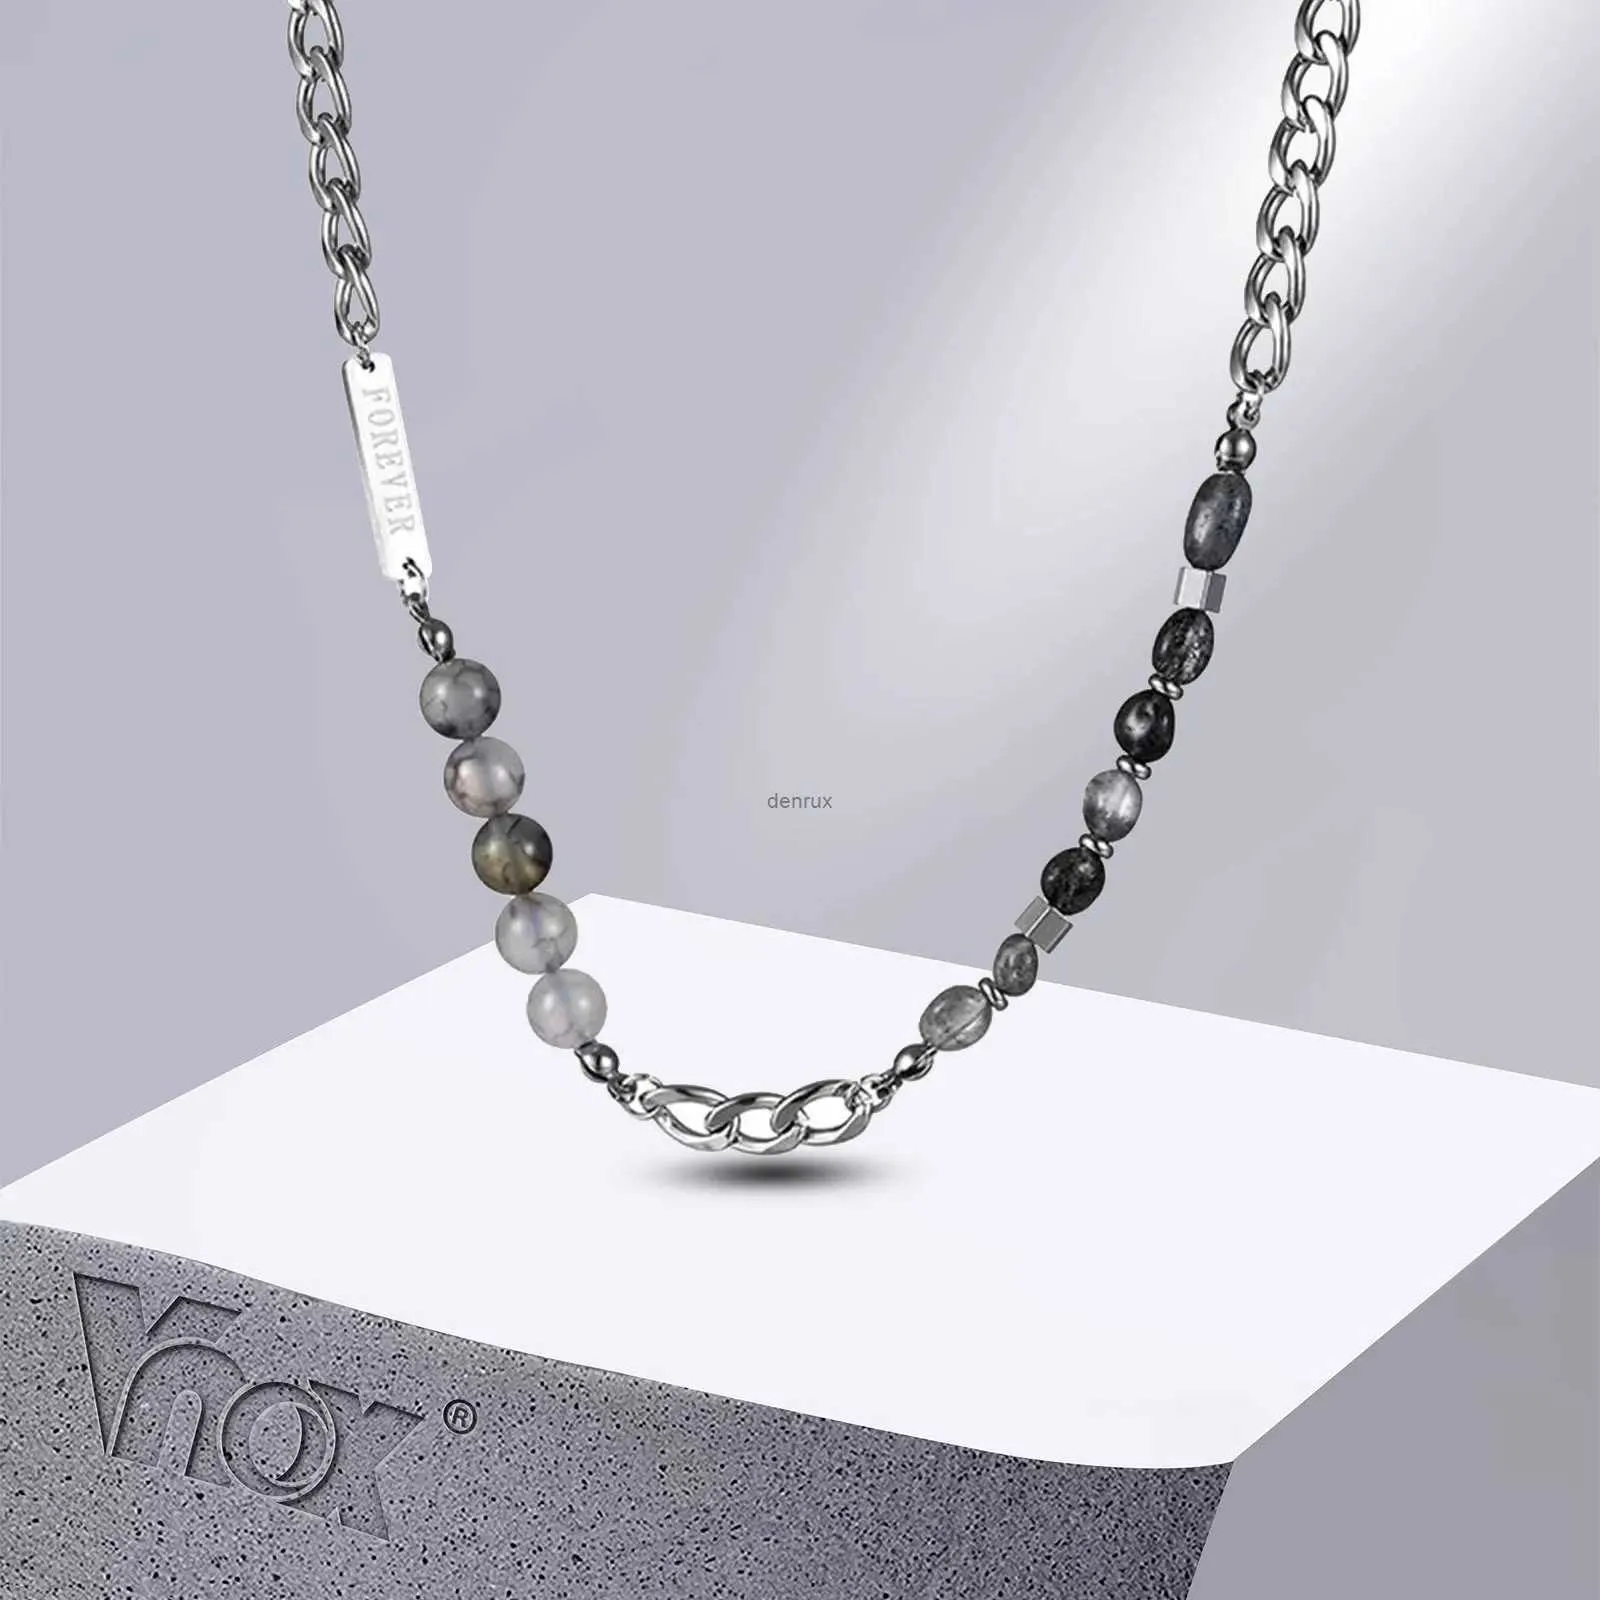 Pendant Necklaces Vnox 7mm Cuban Chain Necklaces Unisex Beads Charm Collar Women Men Miami Curb Links with Forever Bar